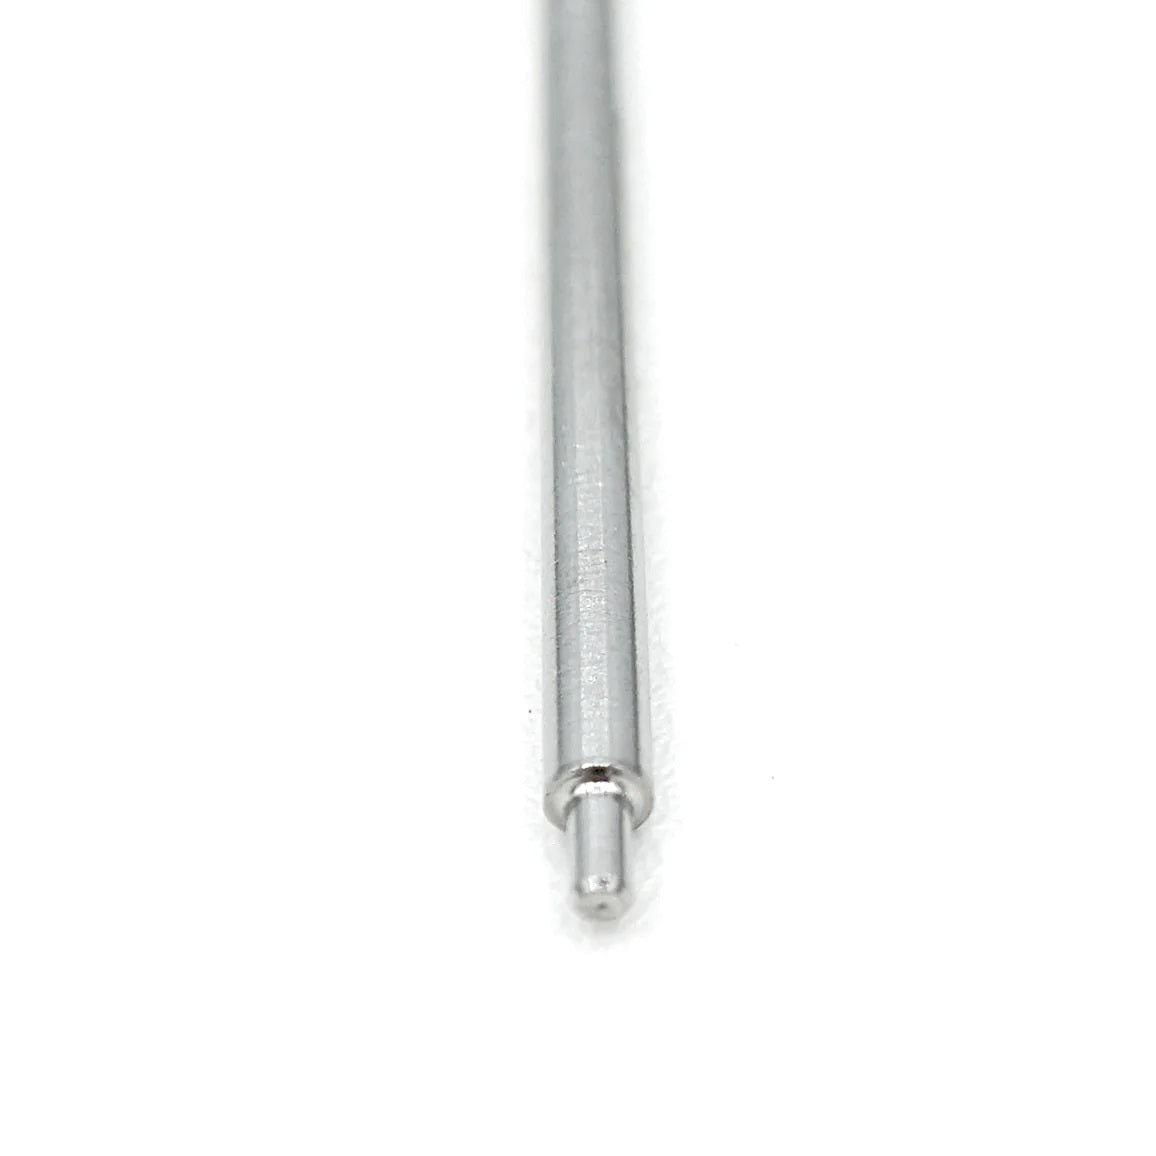 18G Tapers sterile pack of 50